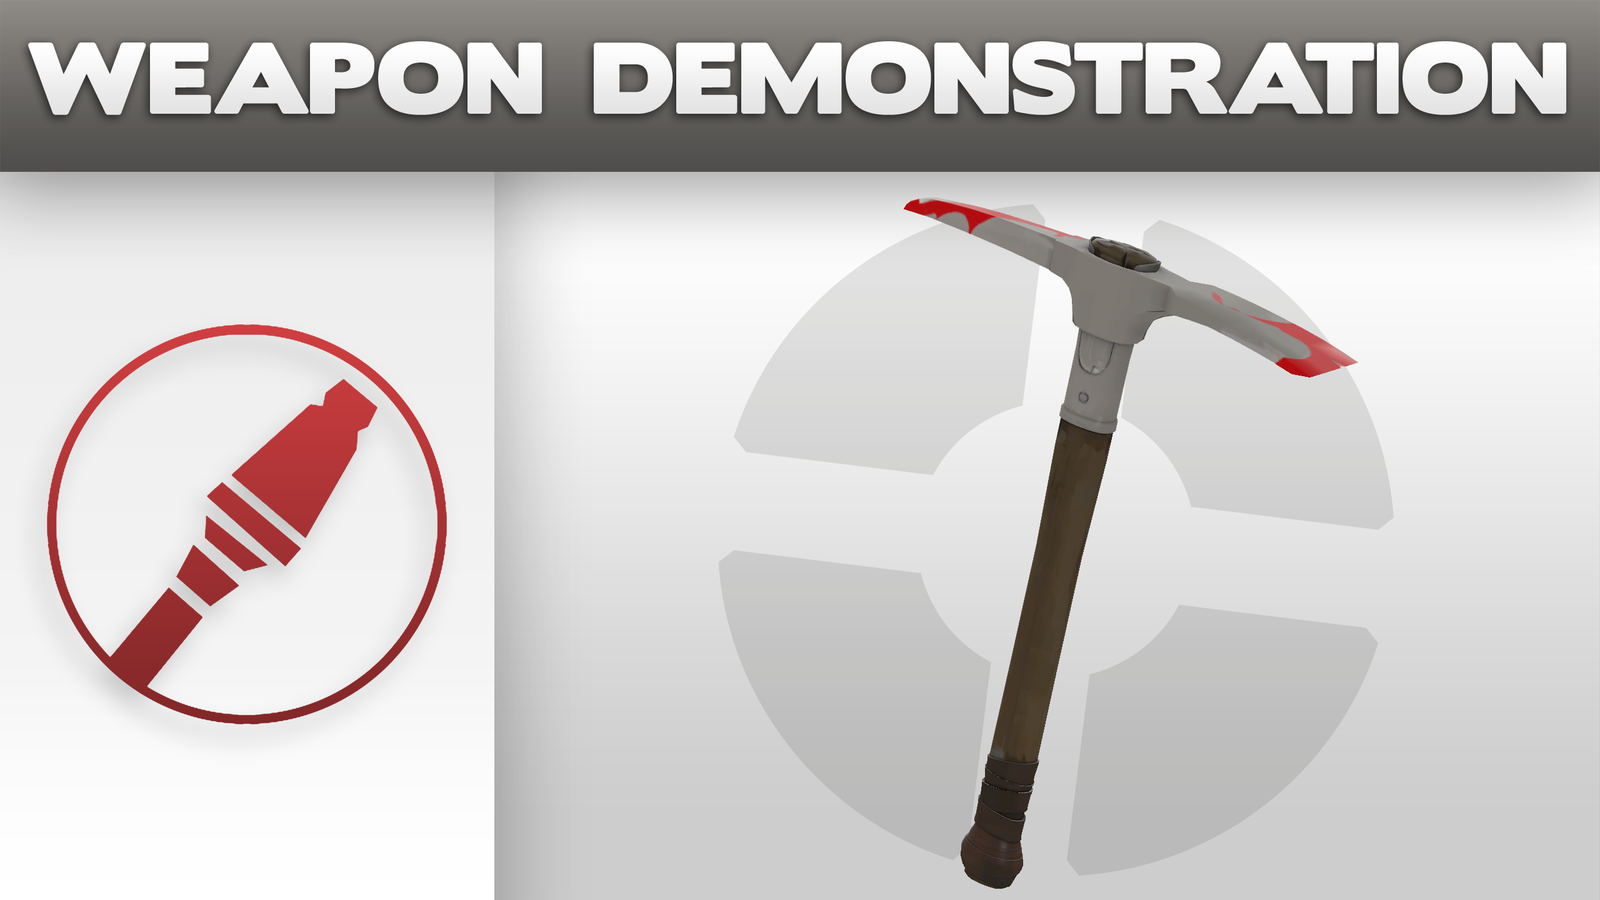 File:Weapon Demonstration thumb equalizer.png.